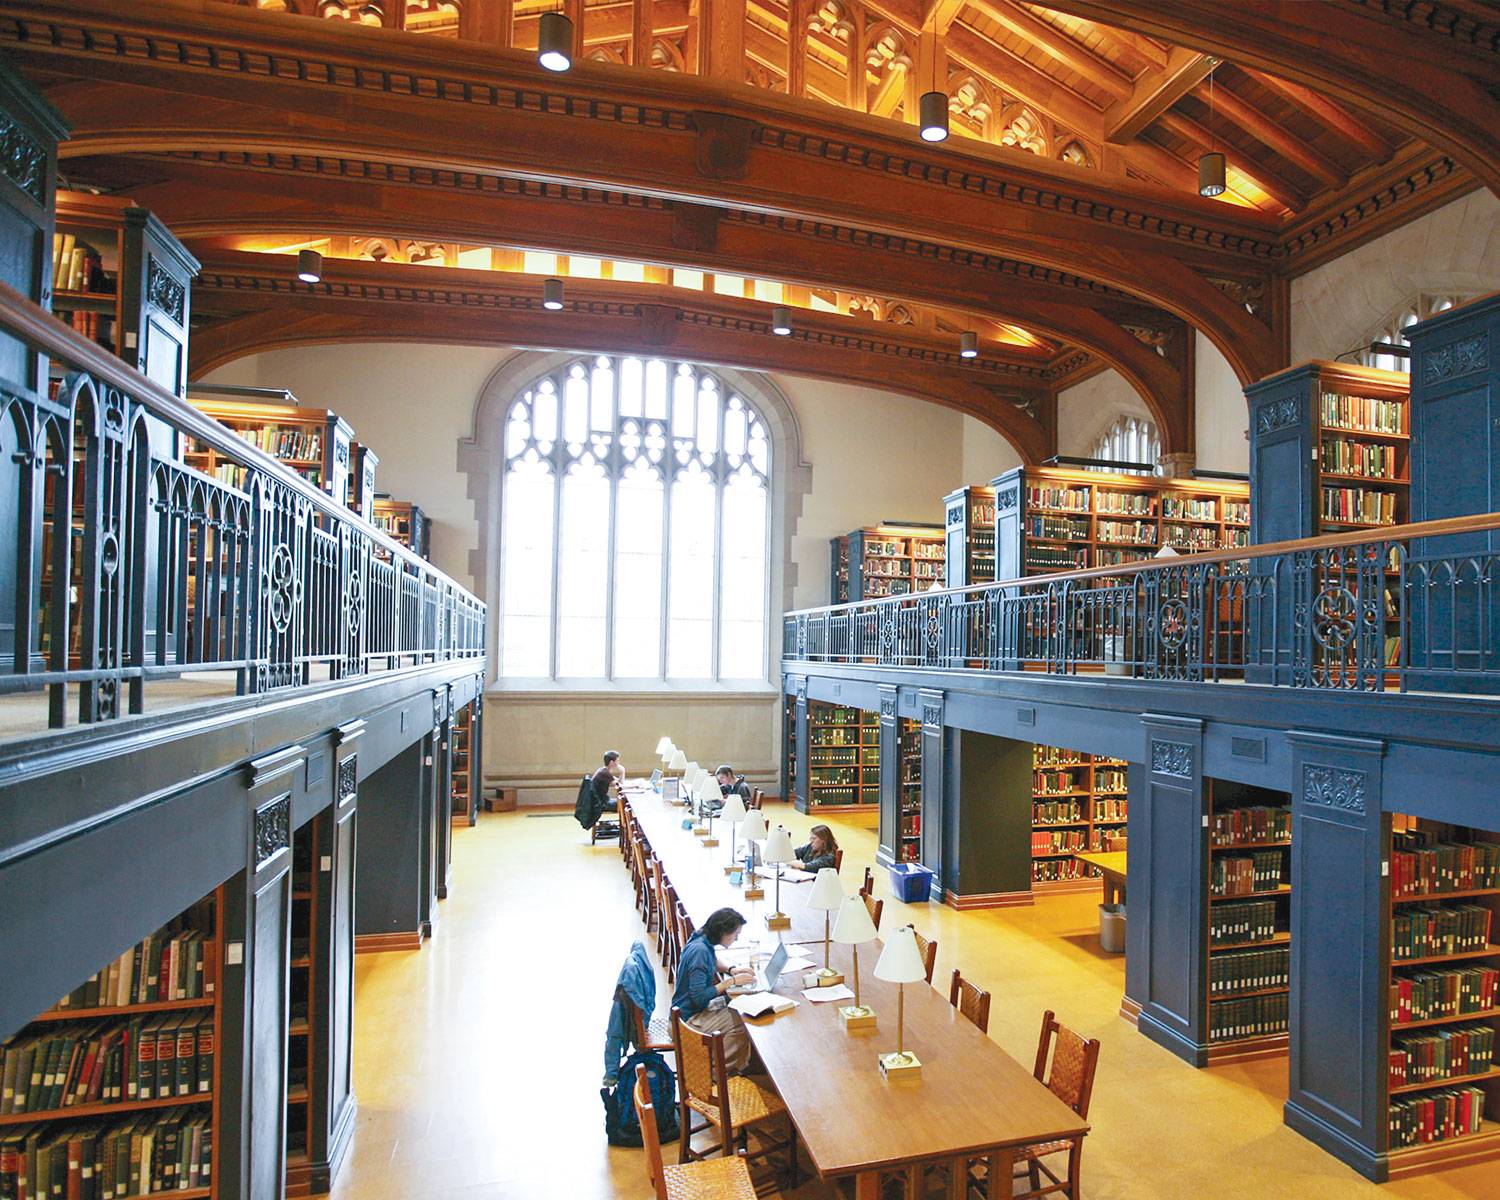 From its inception in 1865, the library at Vassar has been an open shelf li...